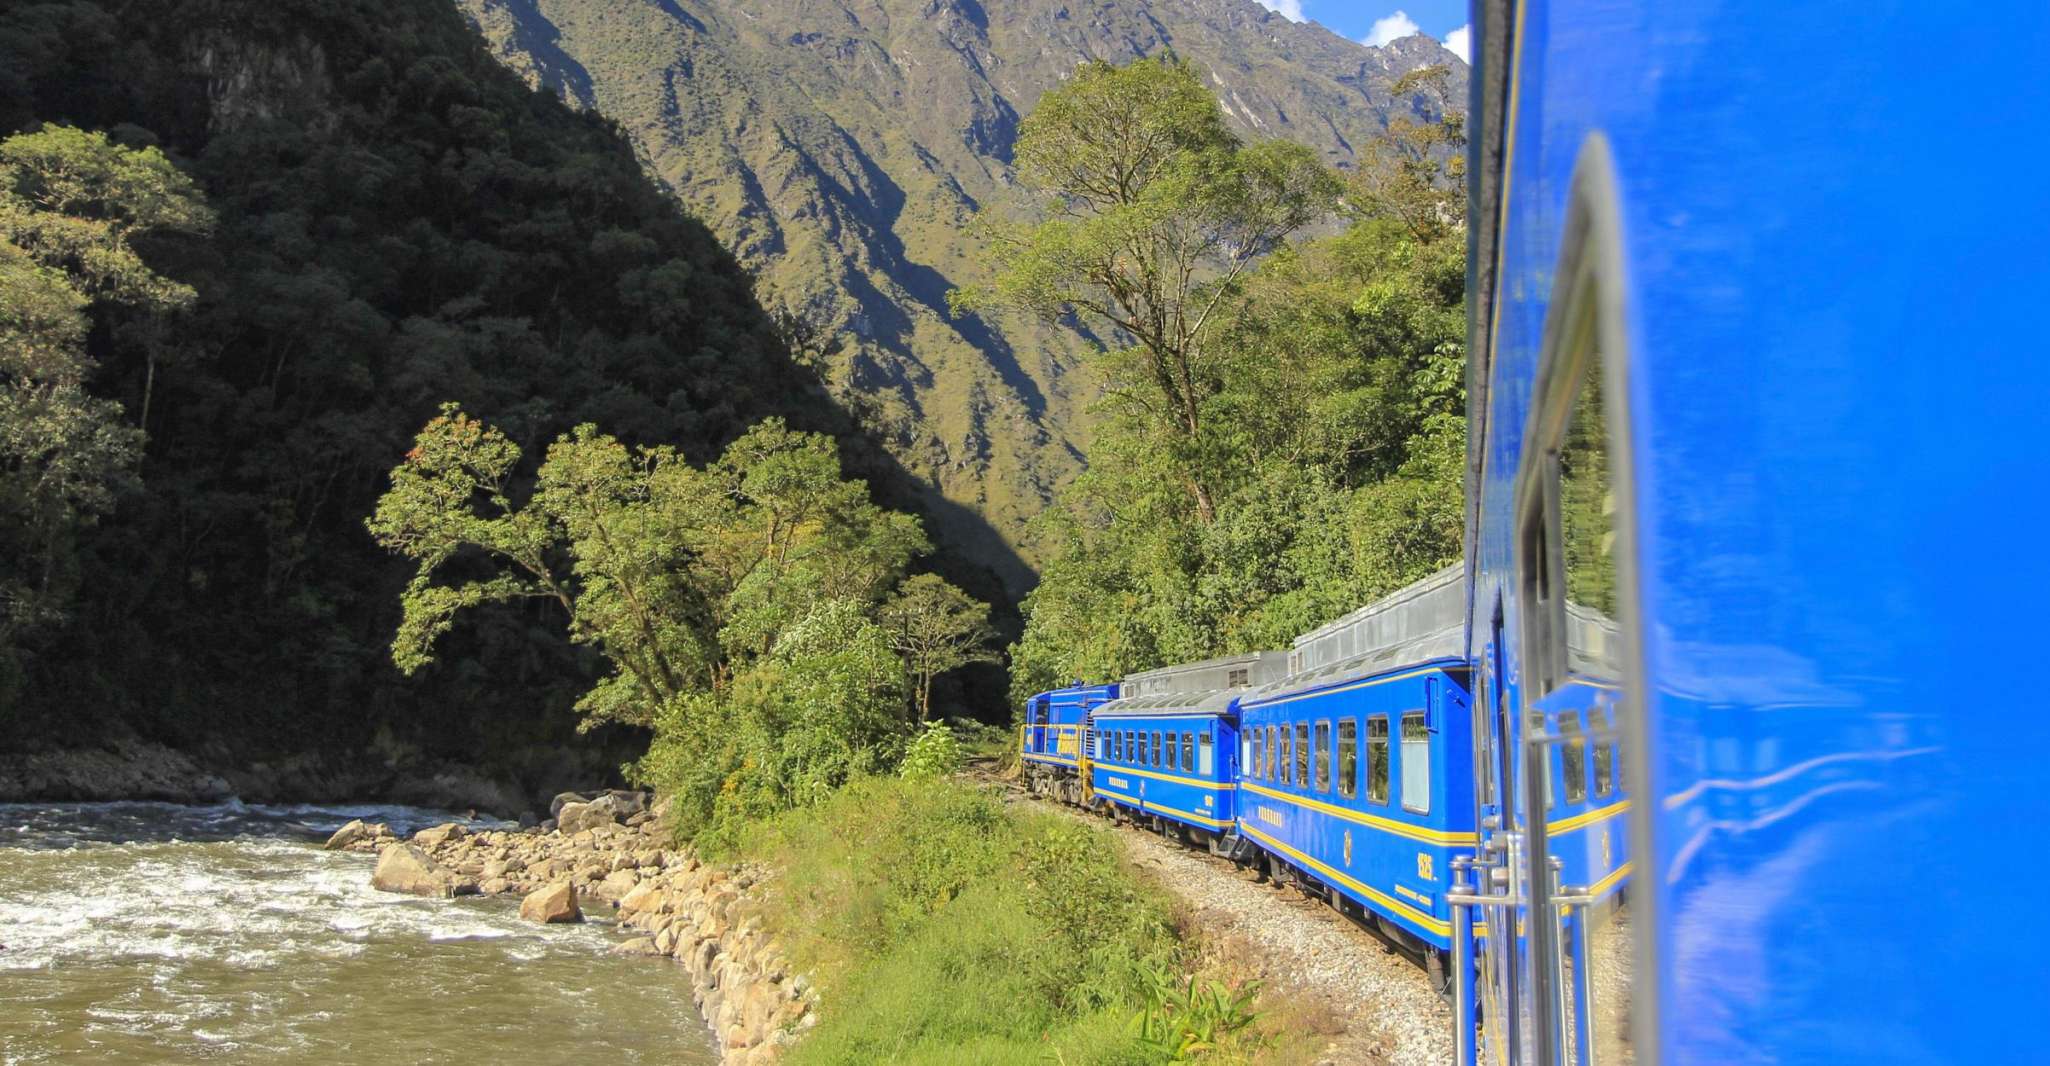 Machu Picchu, Full-Day Tour from Cusco with Optional Lunch - Housity